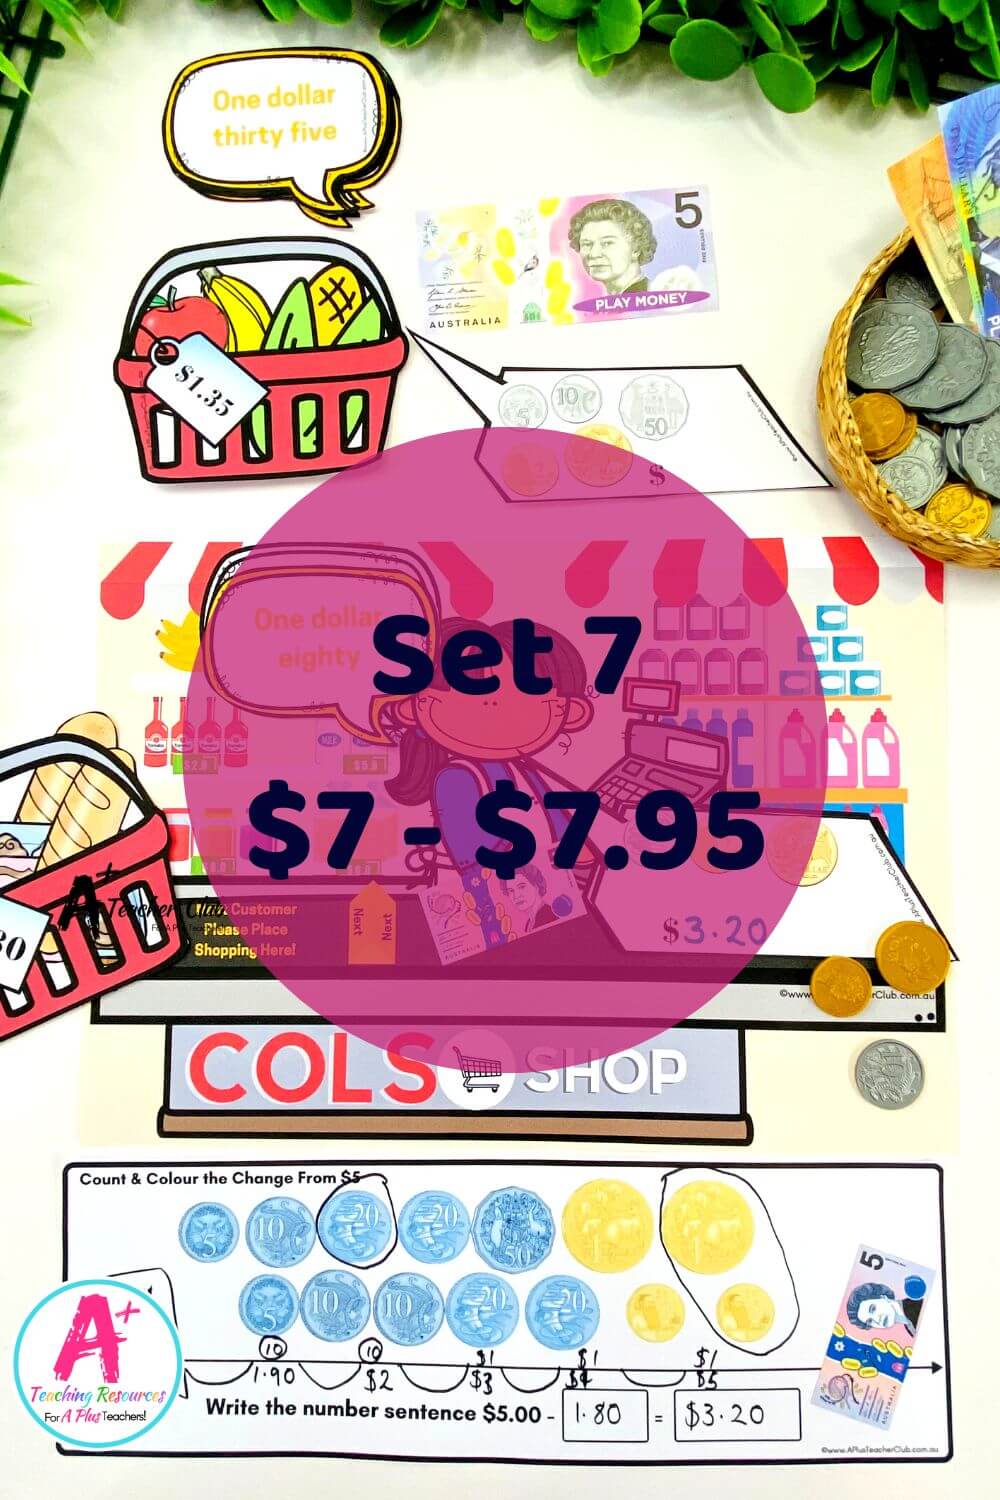 Counting Change Games - COLS Set 7 ($7-$7.95)